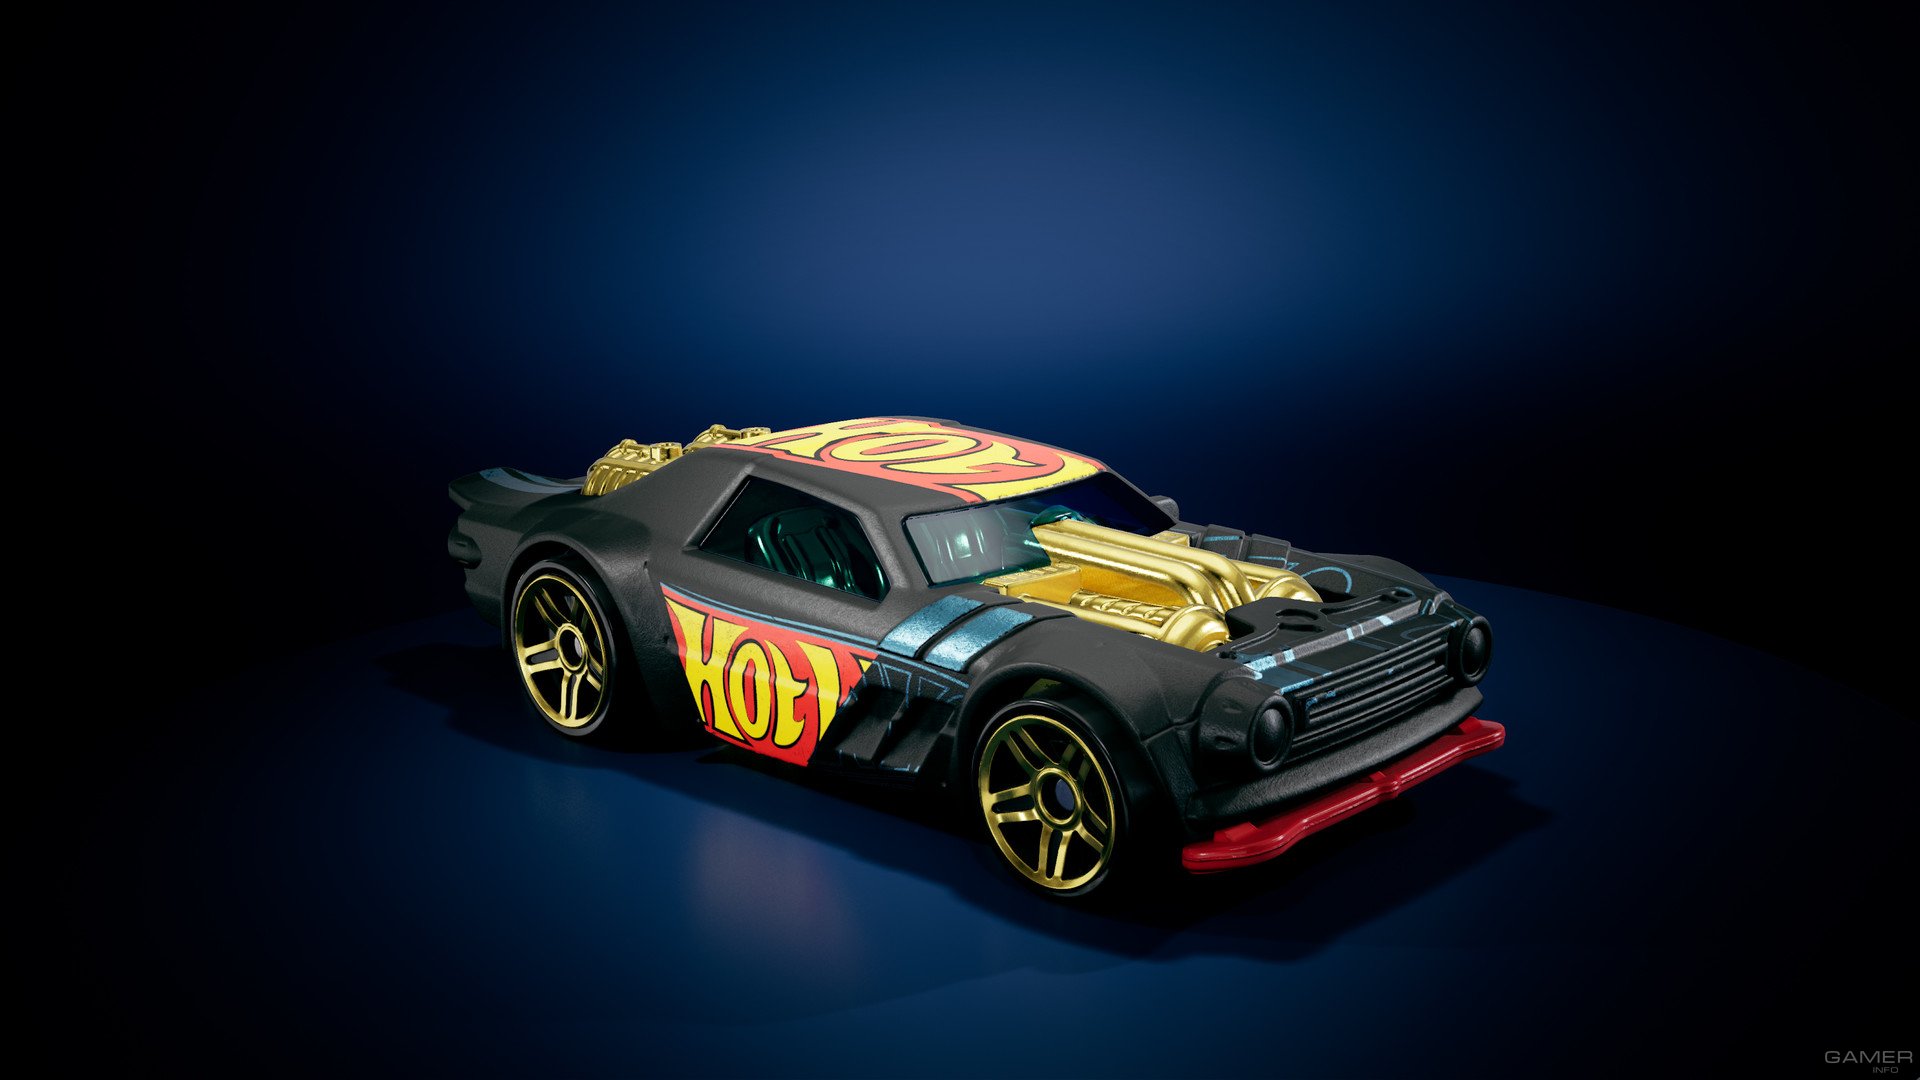 hot wheels unleashed 2 download